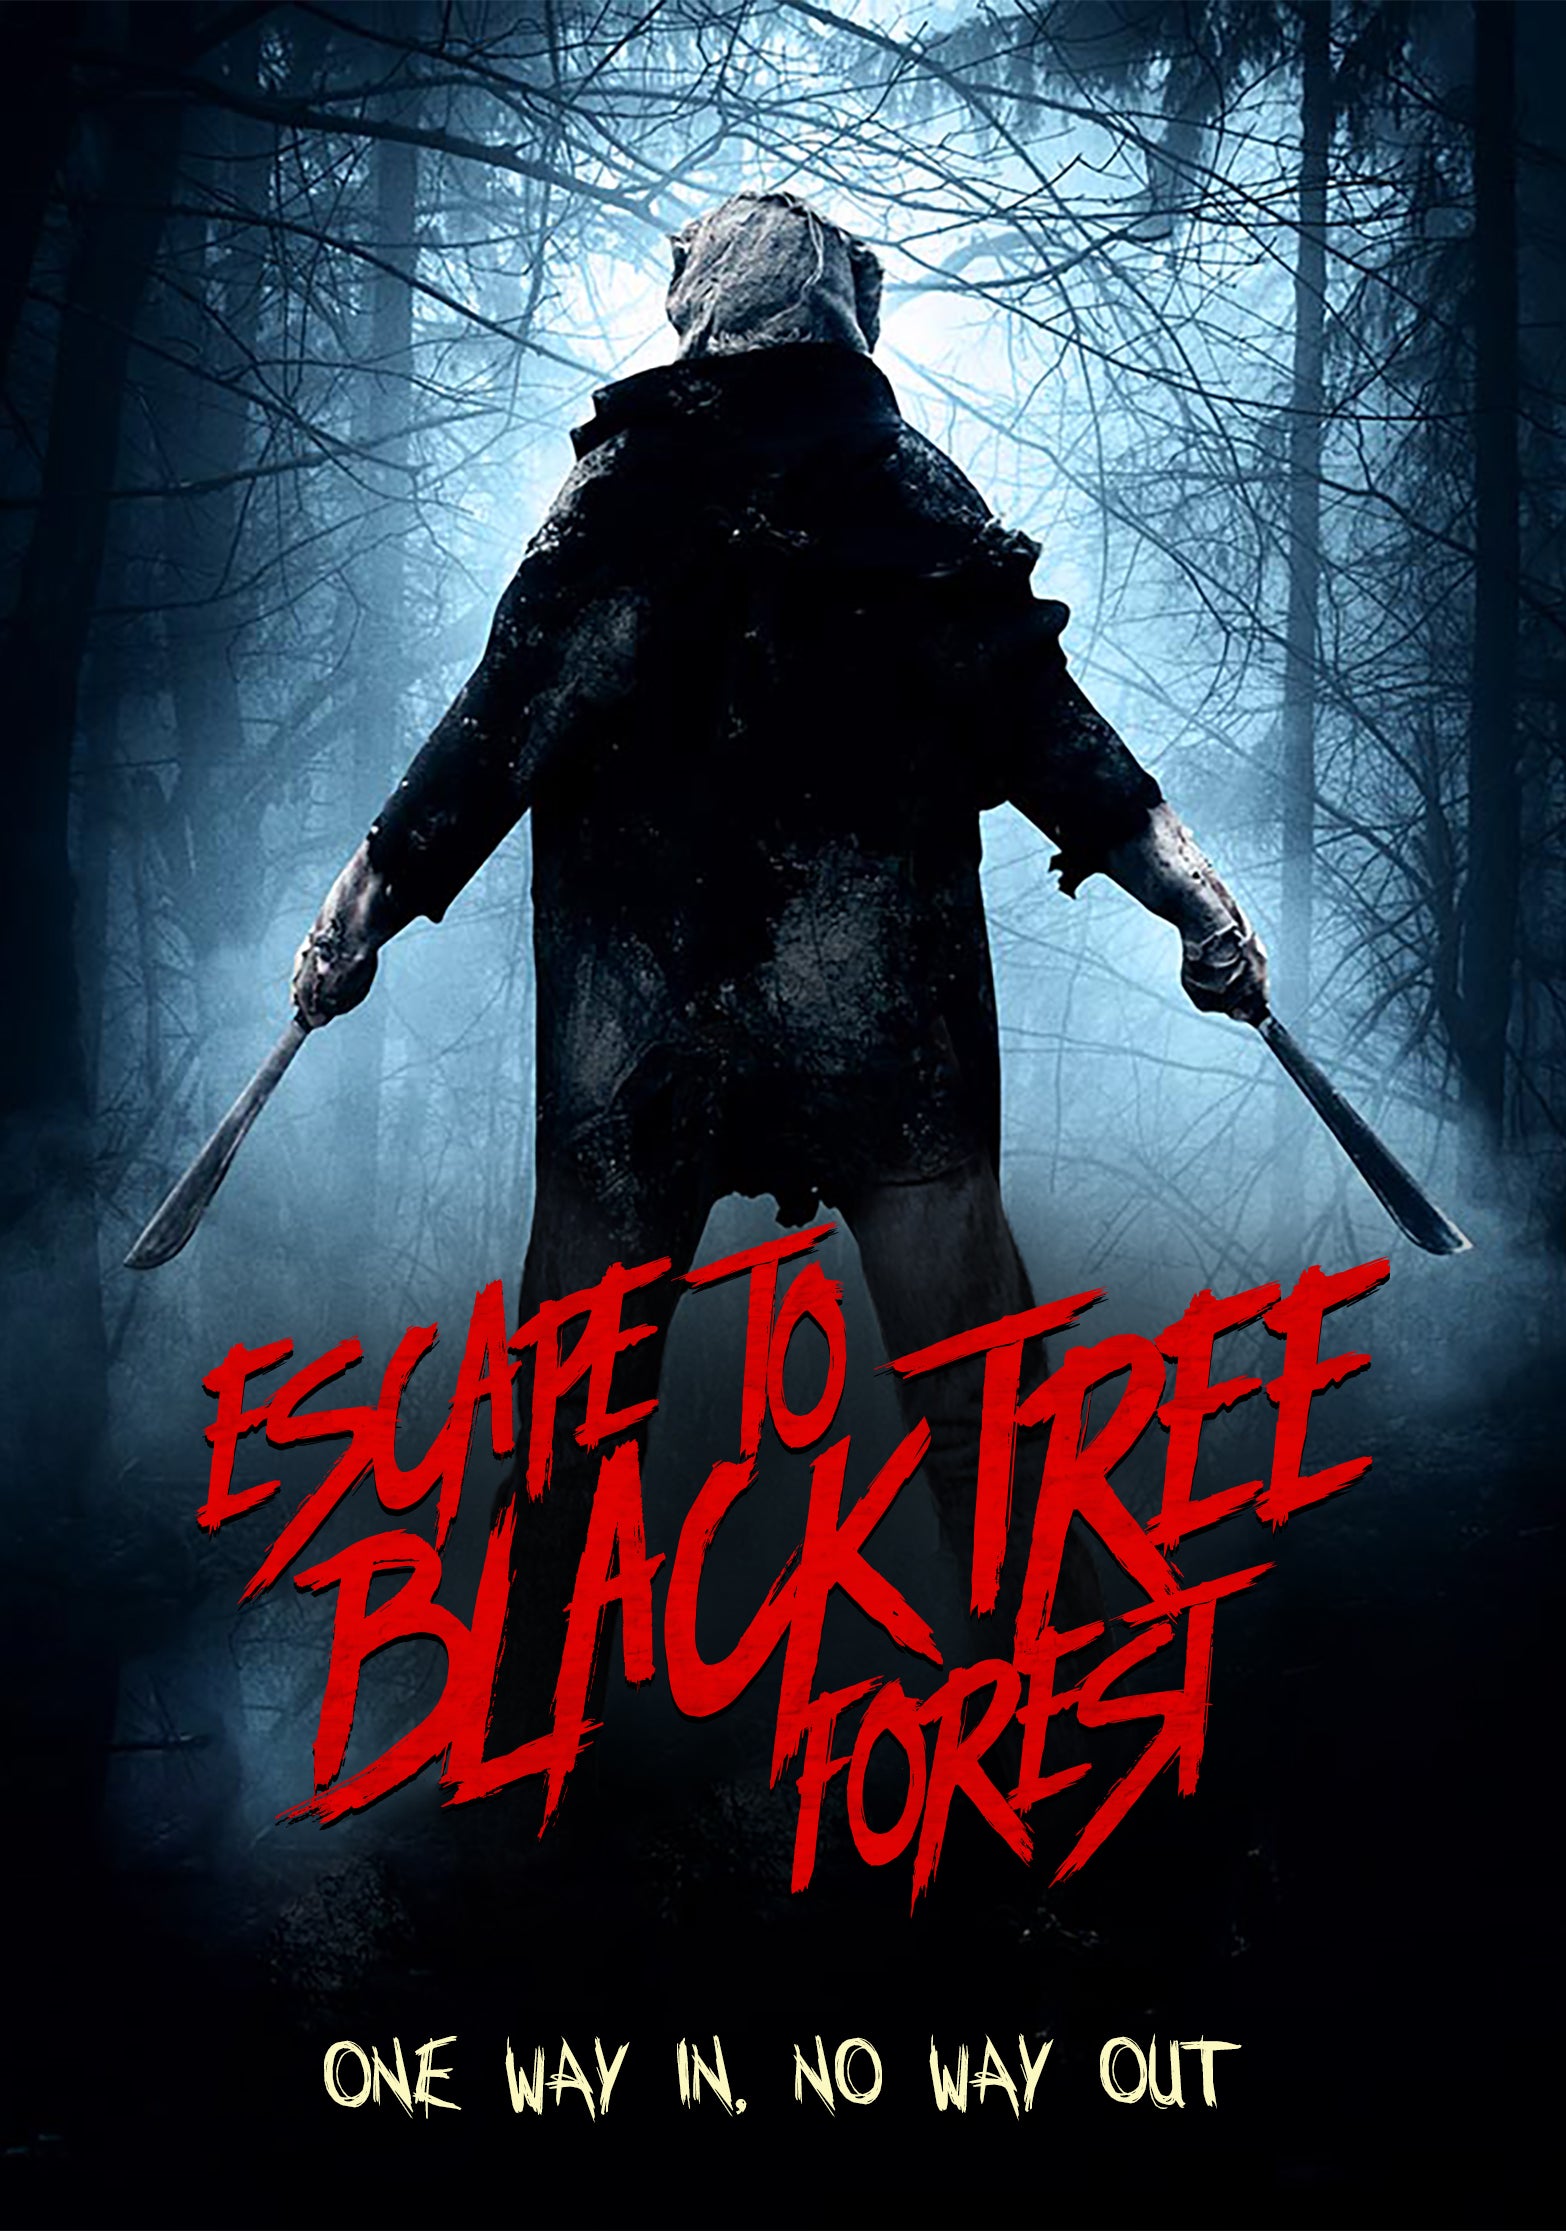 ESCAPE TO BLACK TREE FOREST DVD